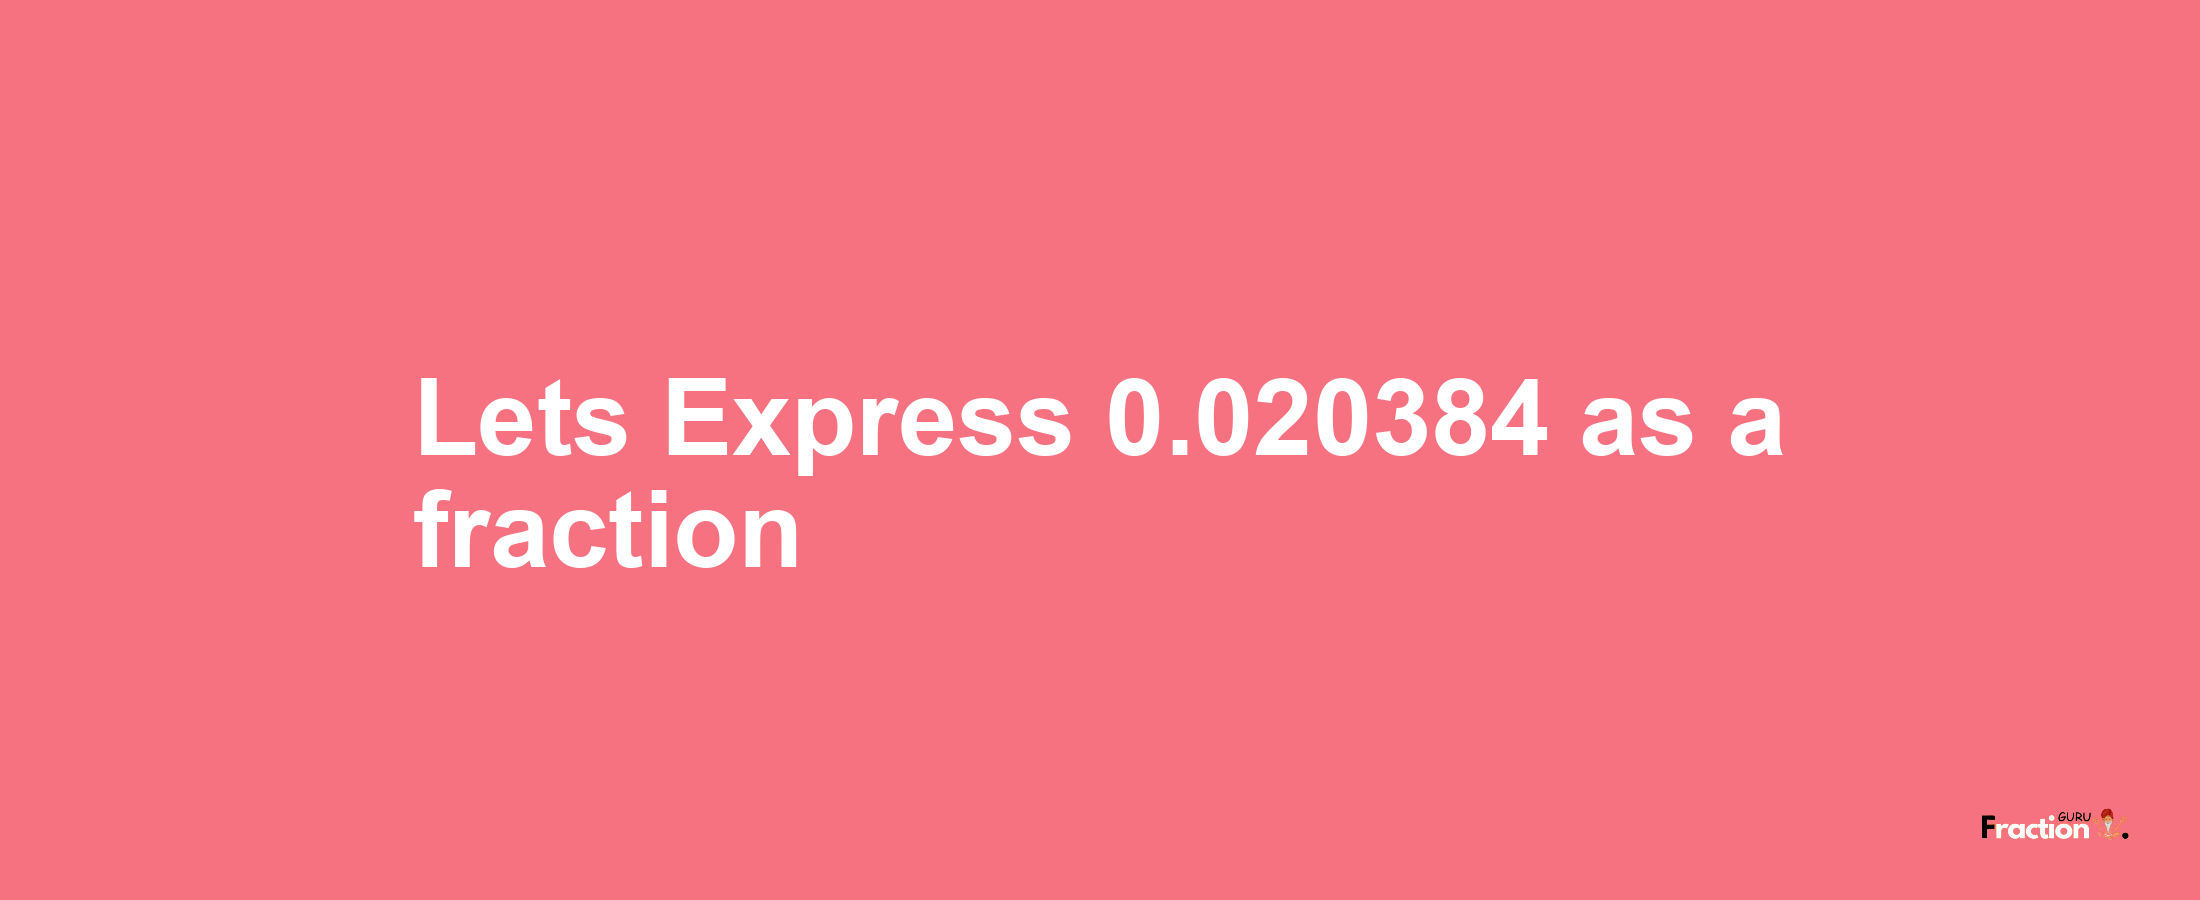 Lets Express 0.020384 as afraction